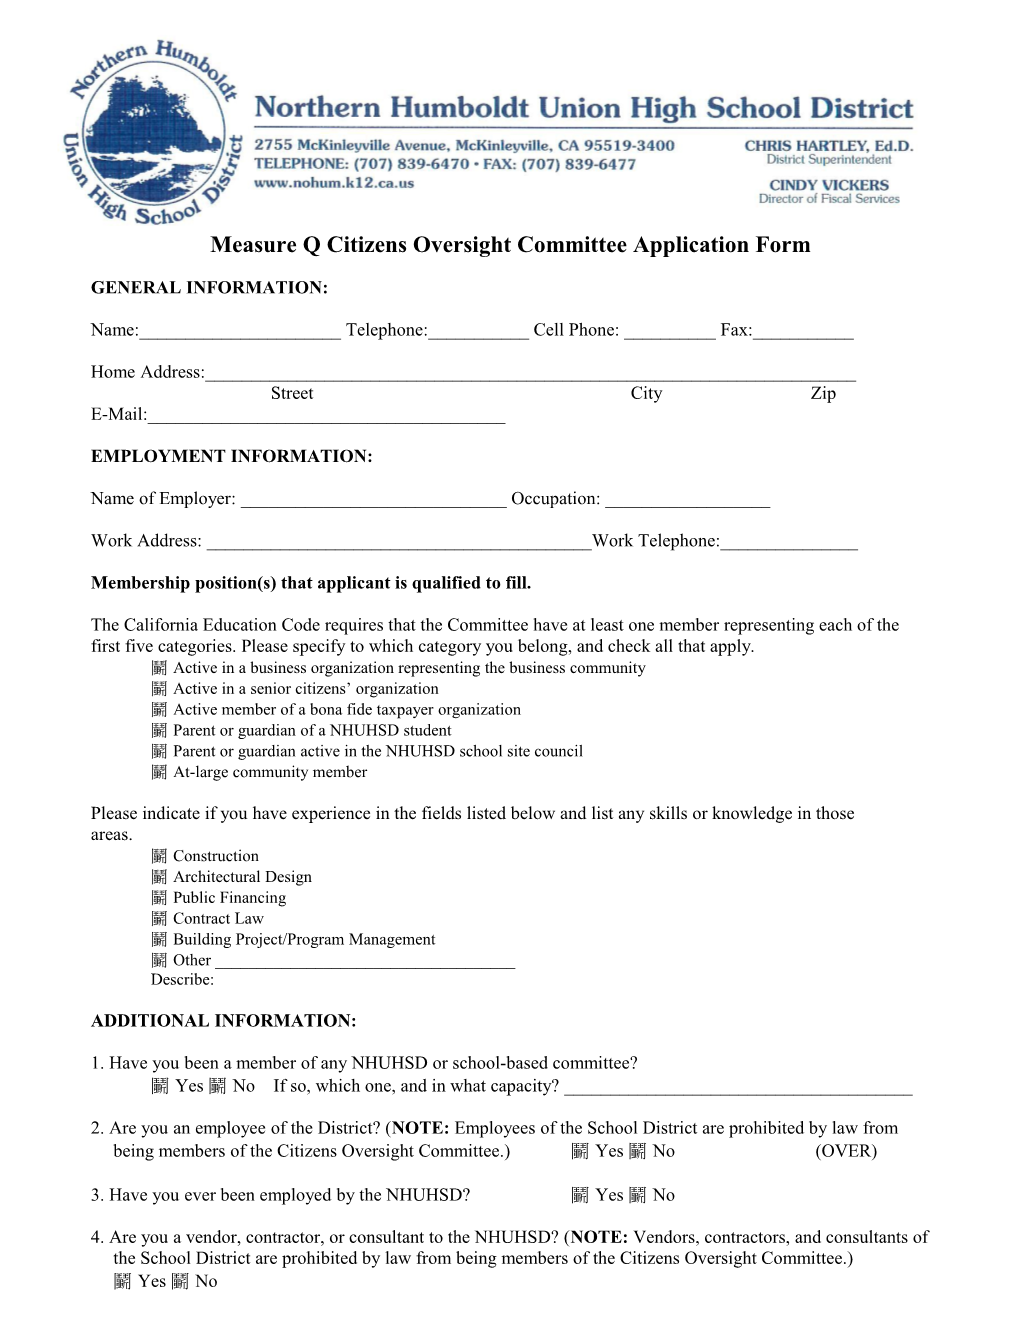 Measure Q Citizens Oversight Committee Application Form